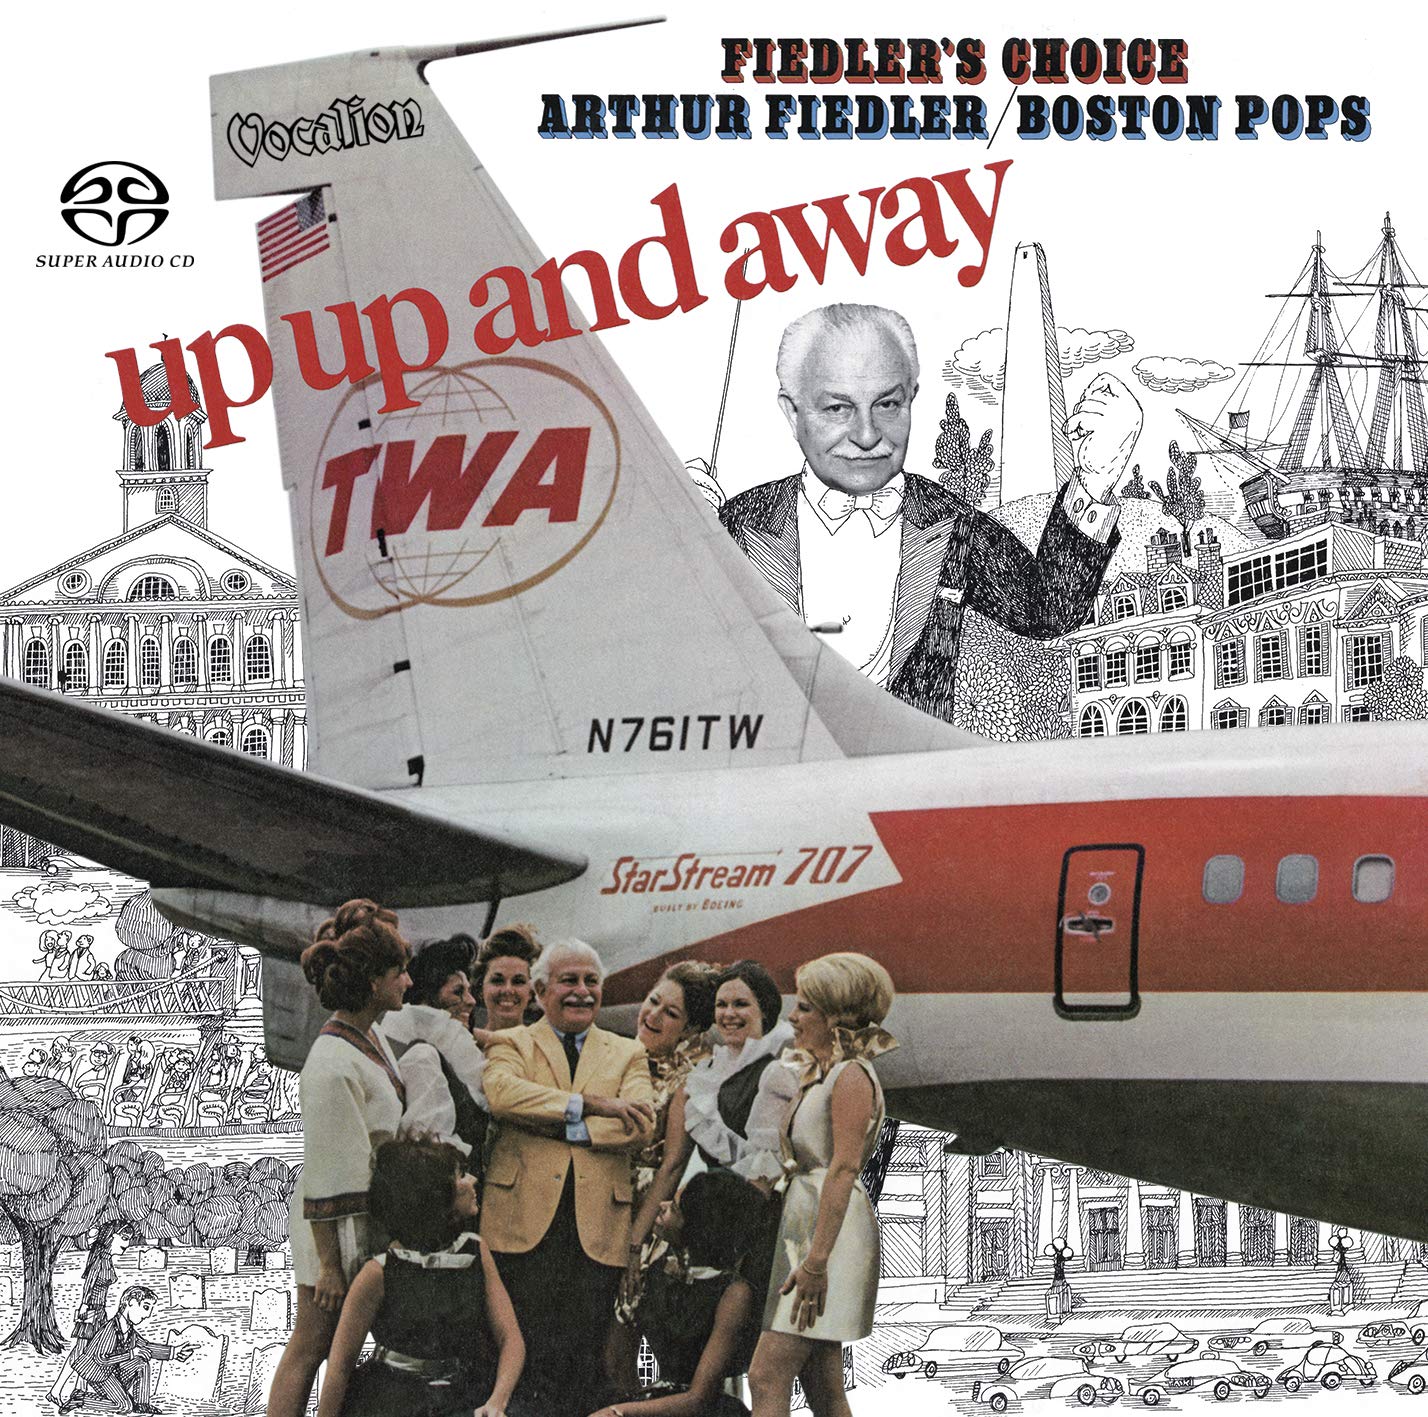 Arthur Fiedler & The Boston Pops – Up, Up and Away & Fiedler’s Choice (1968 & 1970) [Reissue 2019] MCH SACD ISO + Hi-Res FLAC